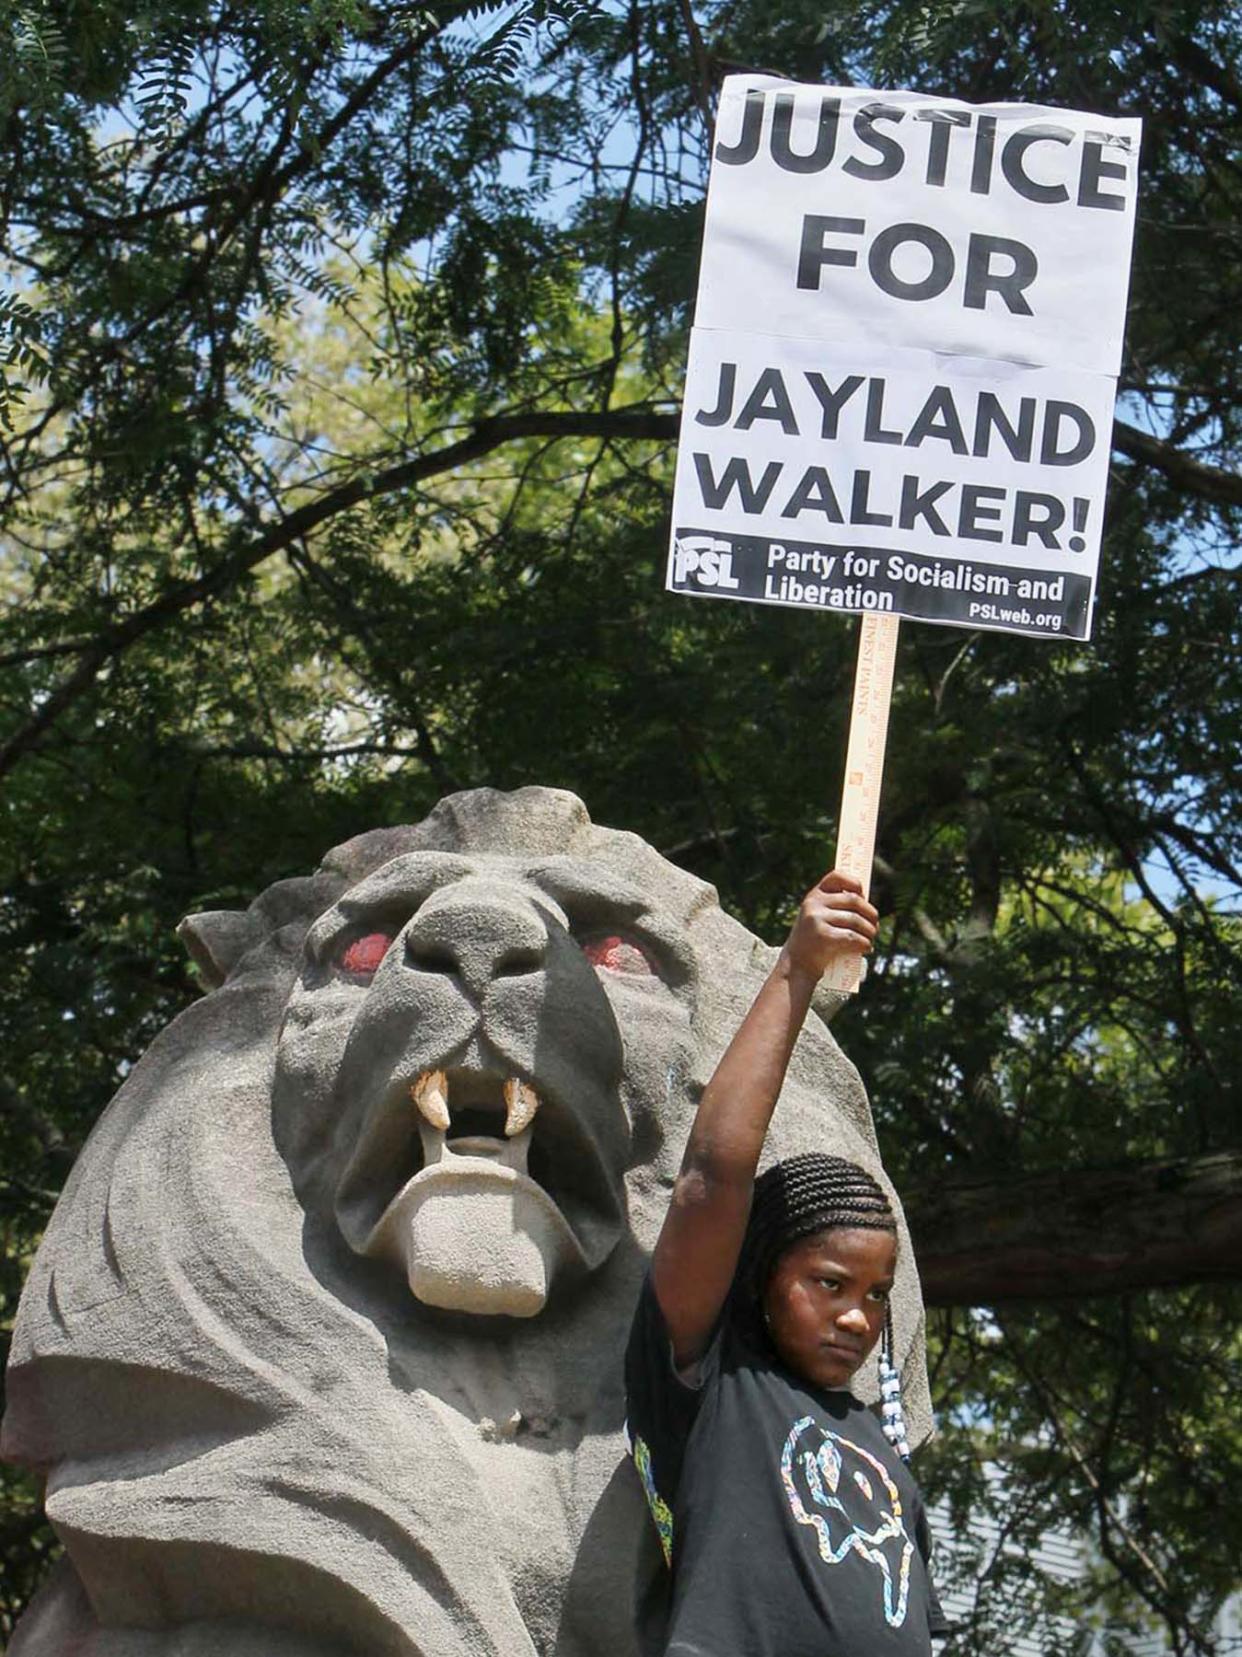 A young activist holds a sign in front of one of the lions at the Summit County Courthouse during a protest of the police shooting of Jayland Walker organized by the Party for Socialism and Liberation on July 9, 2022, in Akron.